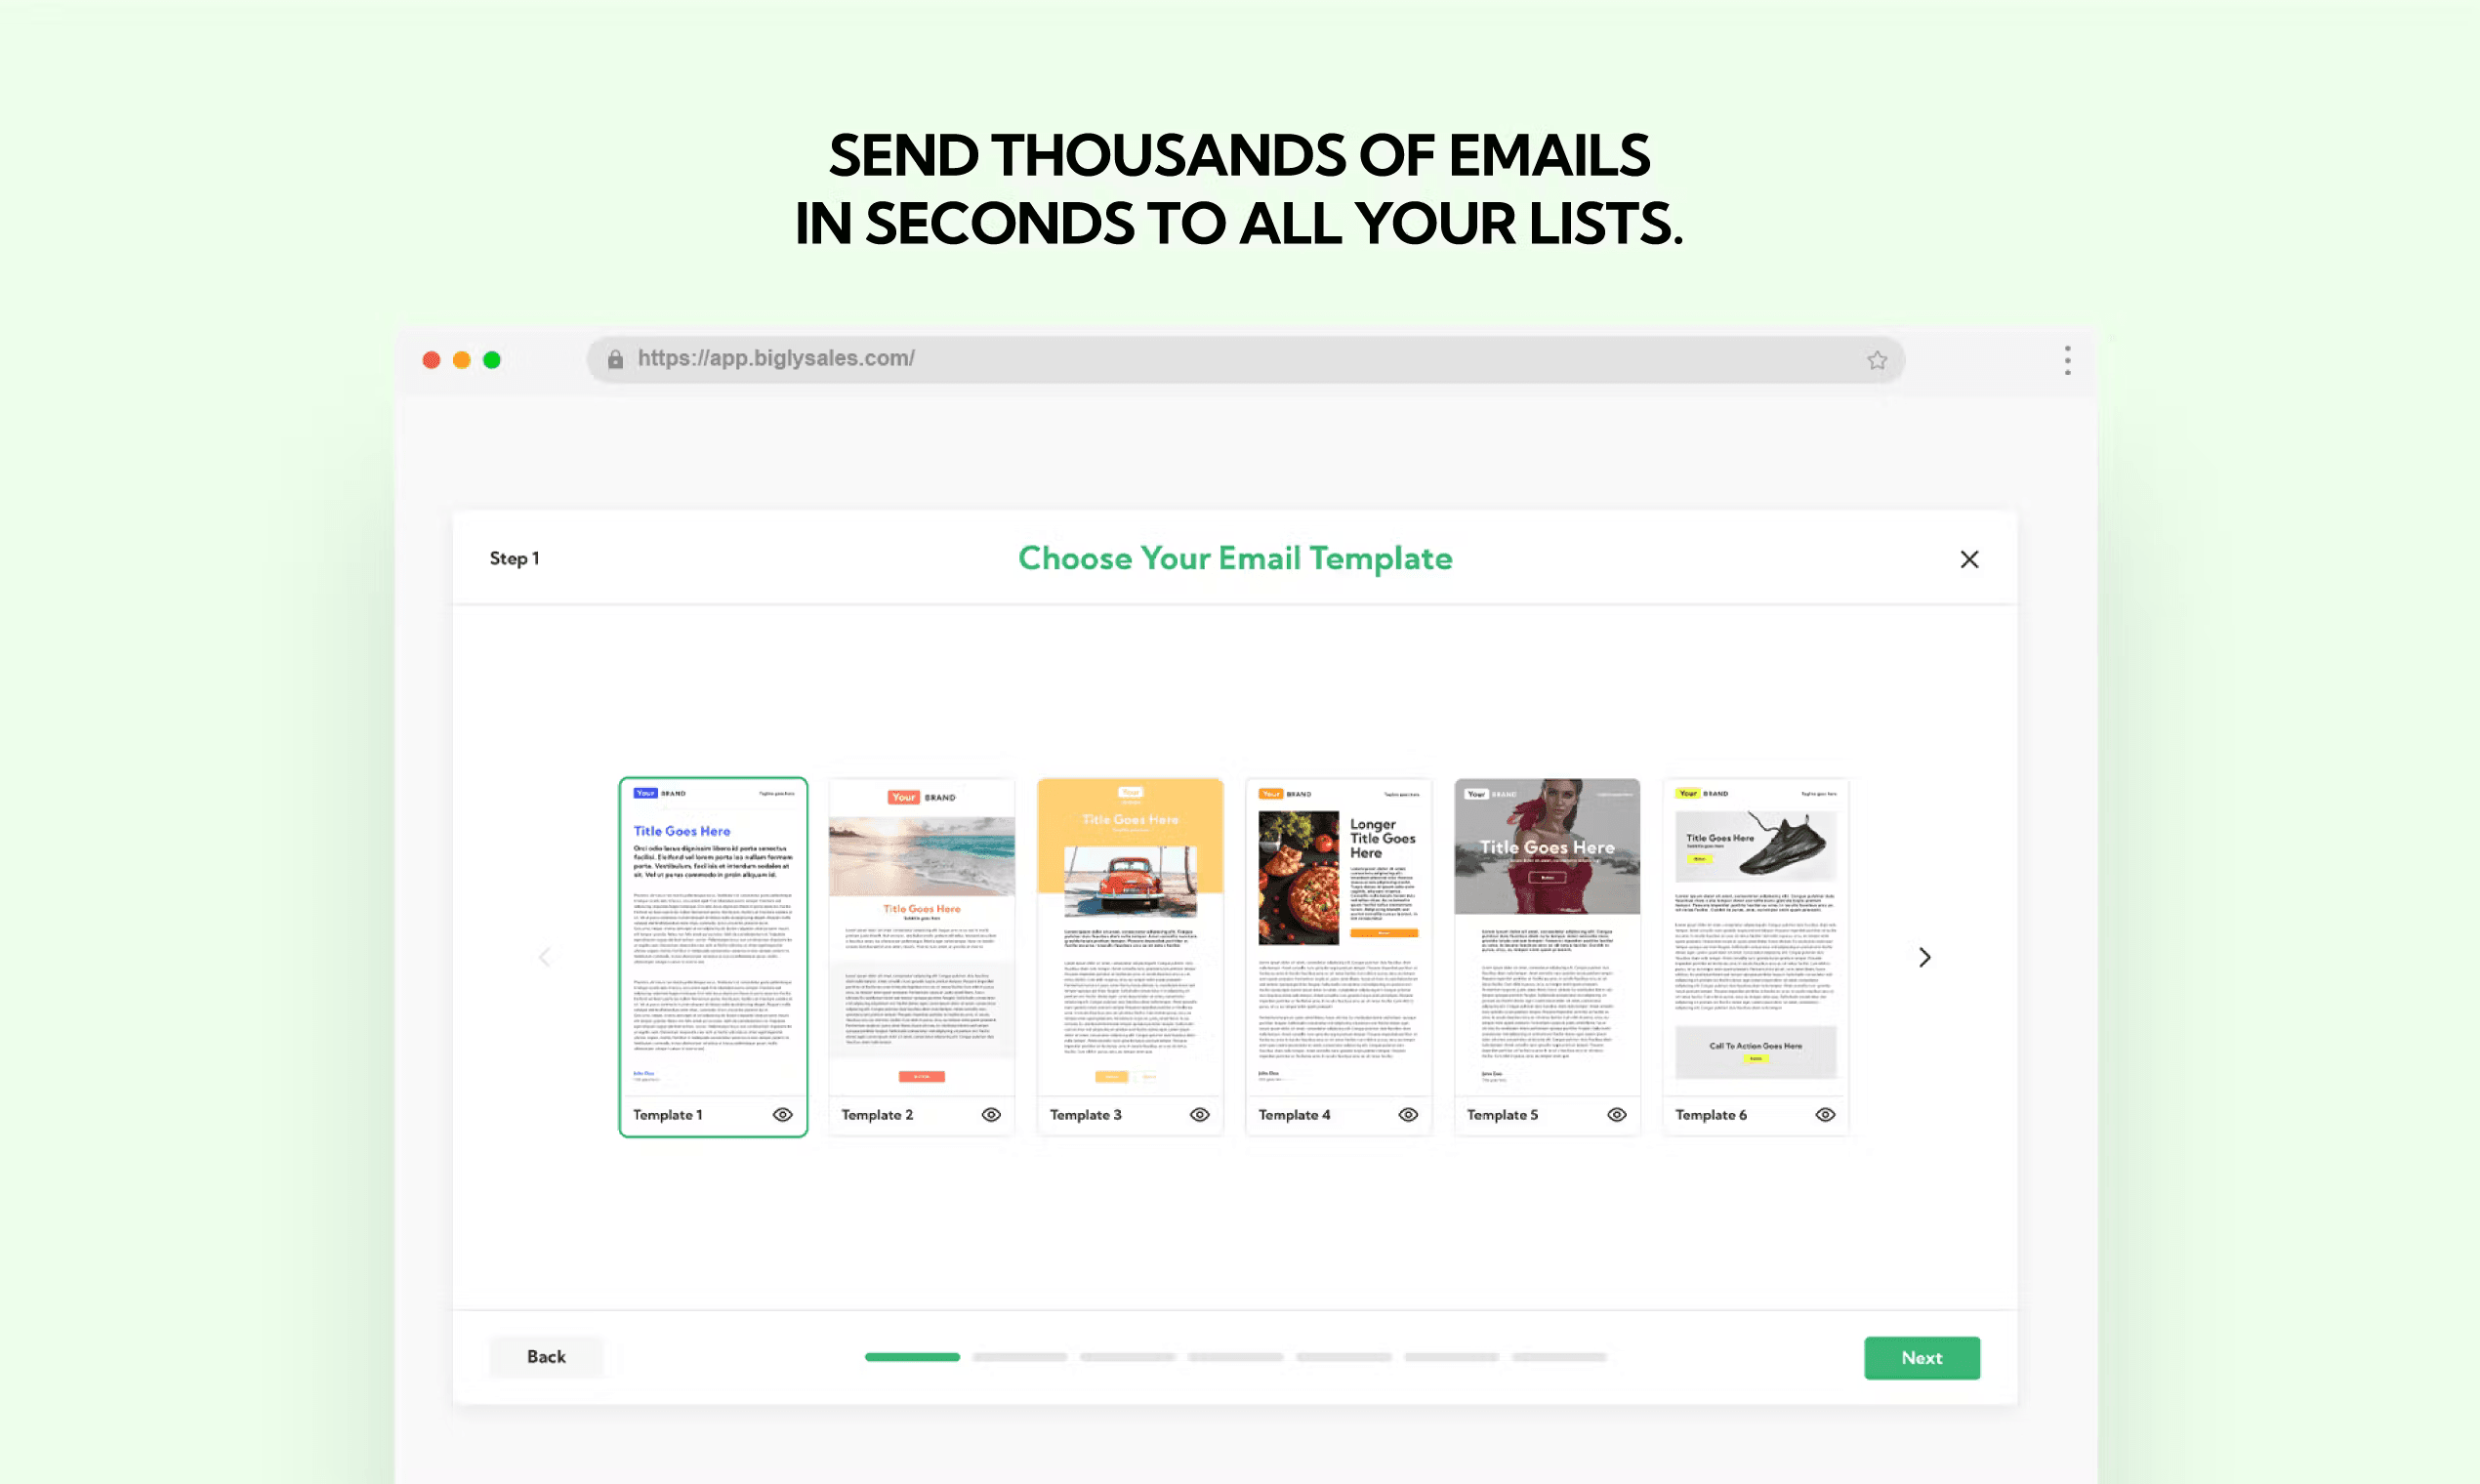 Send thousands of emails in seconds to all your lists. Use Bigly's AI magic to send customized messages to every recipient.